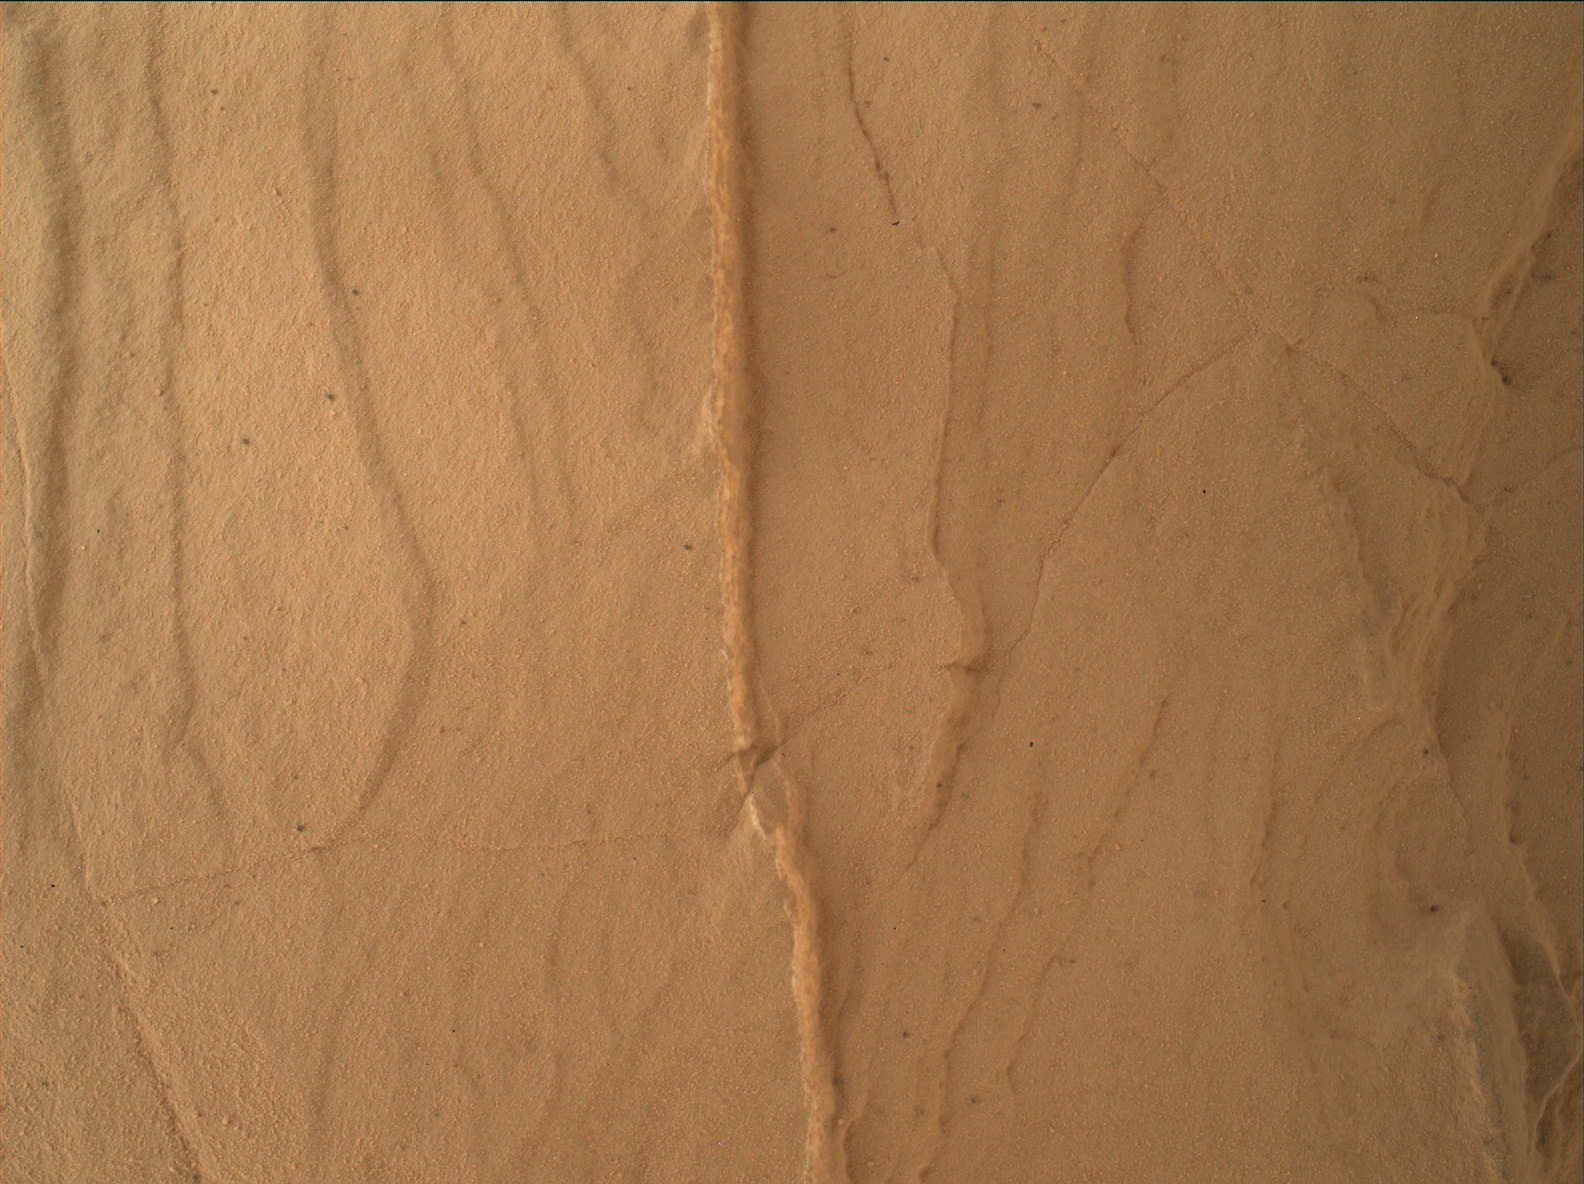 Nasa's Mars rover Curiosity acquired this image using its Mars Hand Lens Imager (MAHLI) on Sol 1725